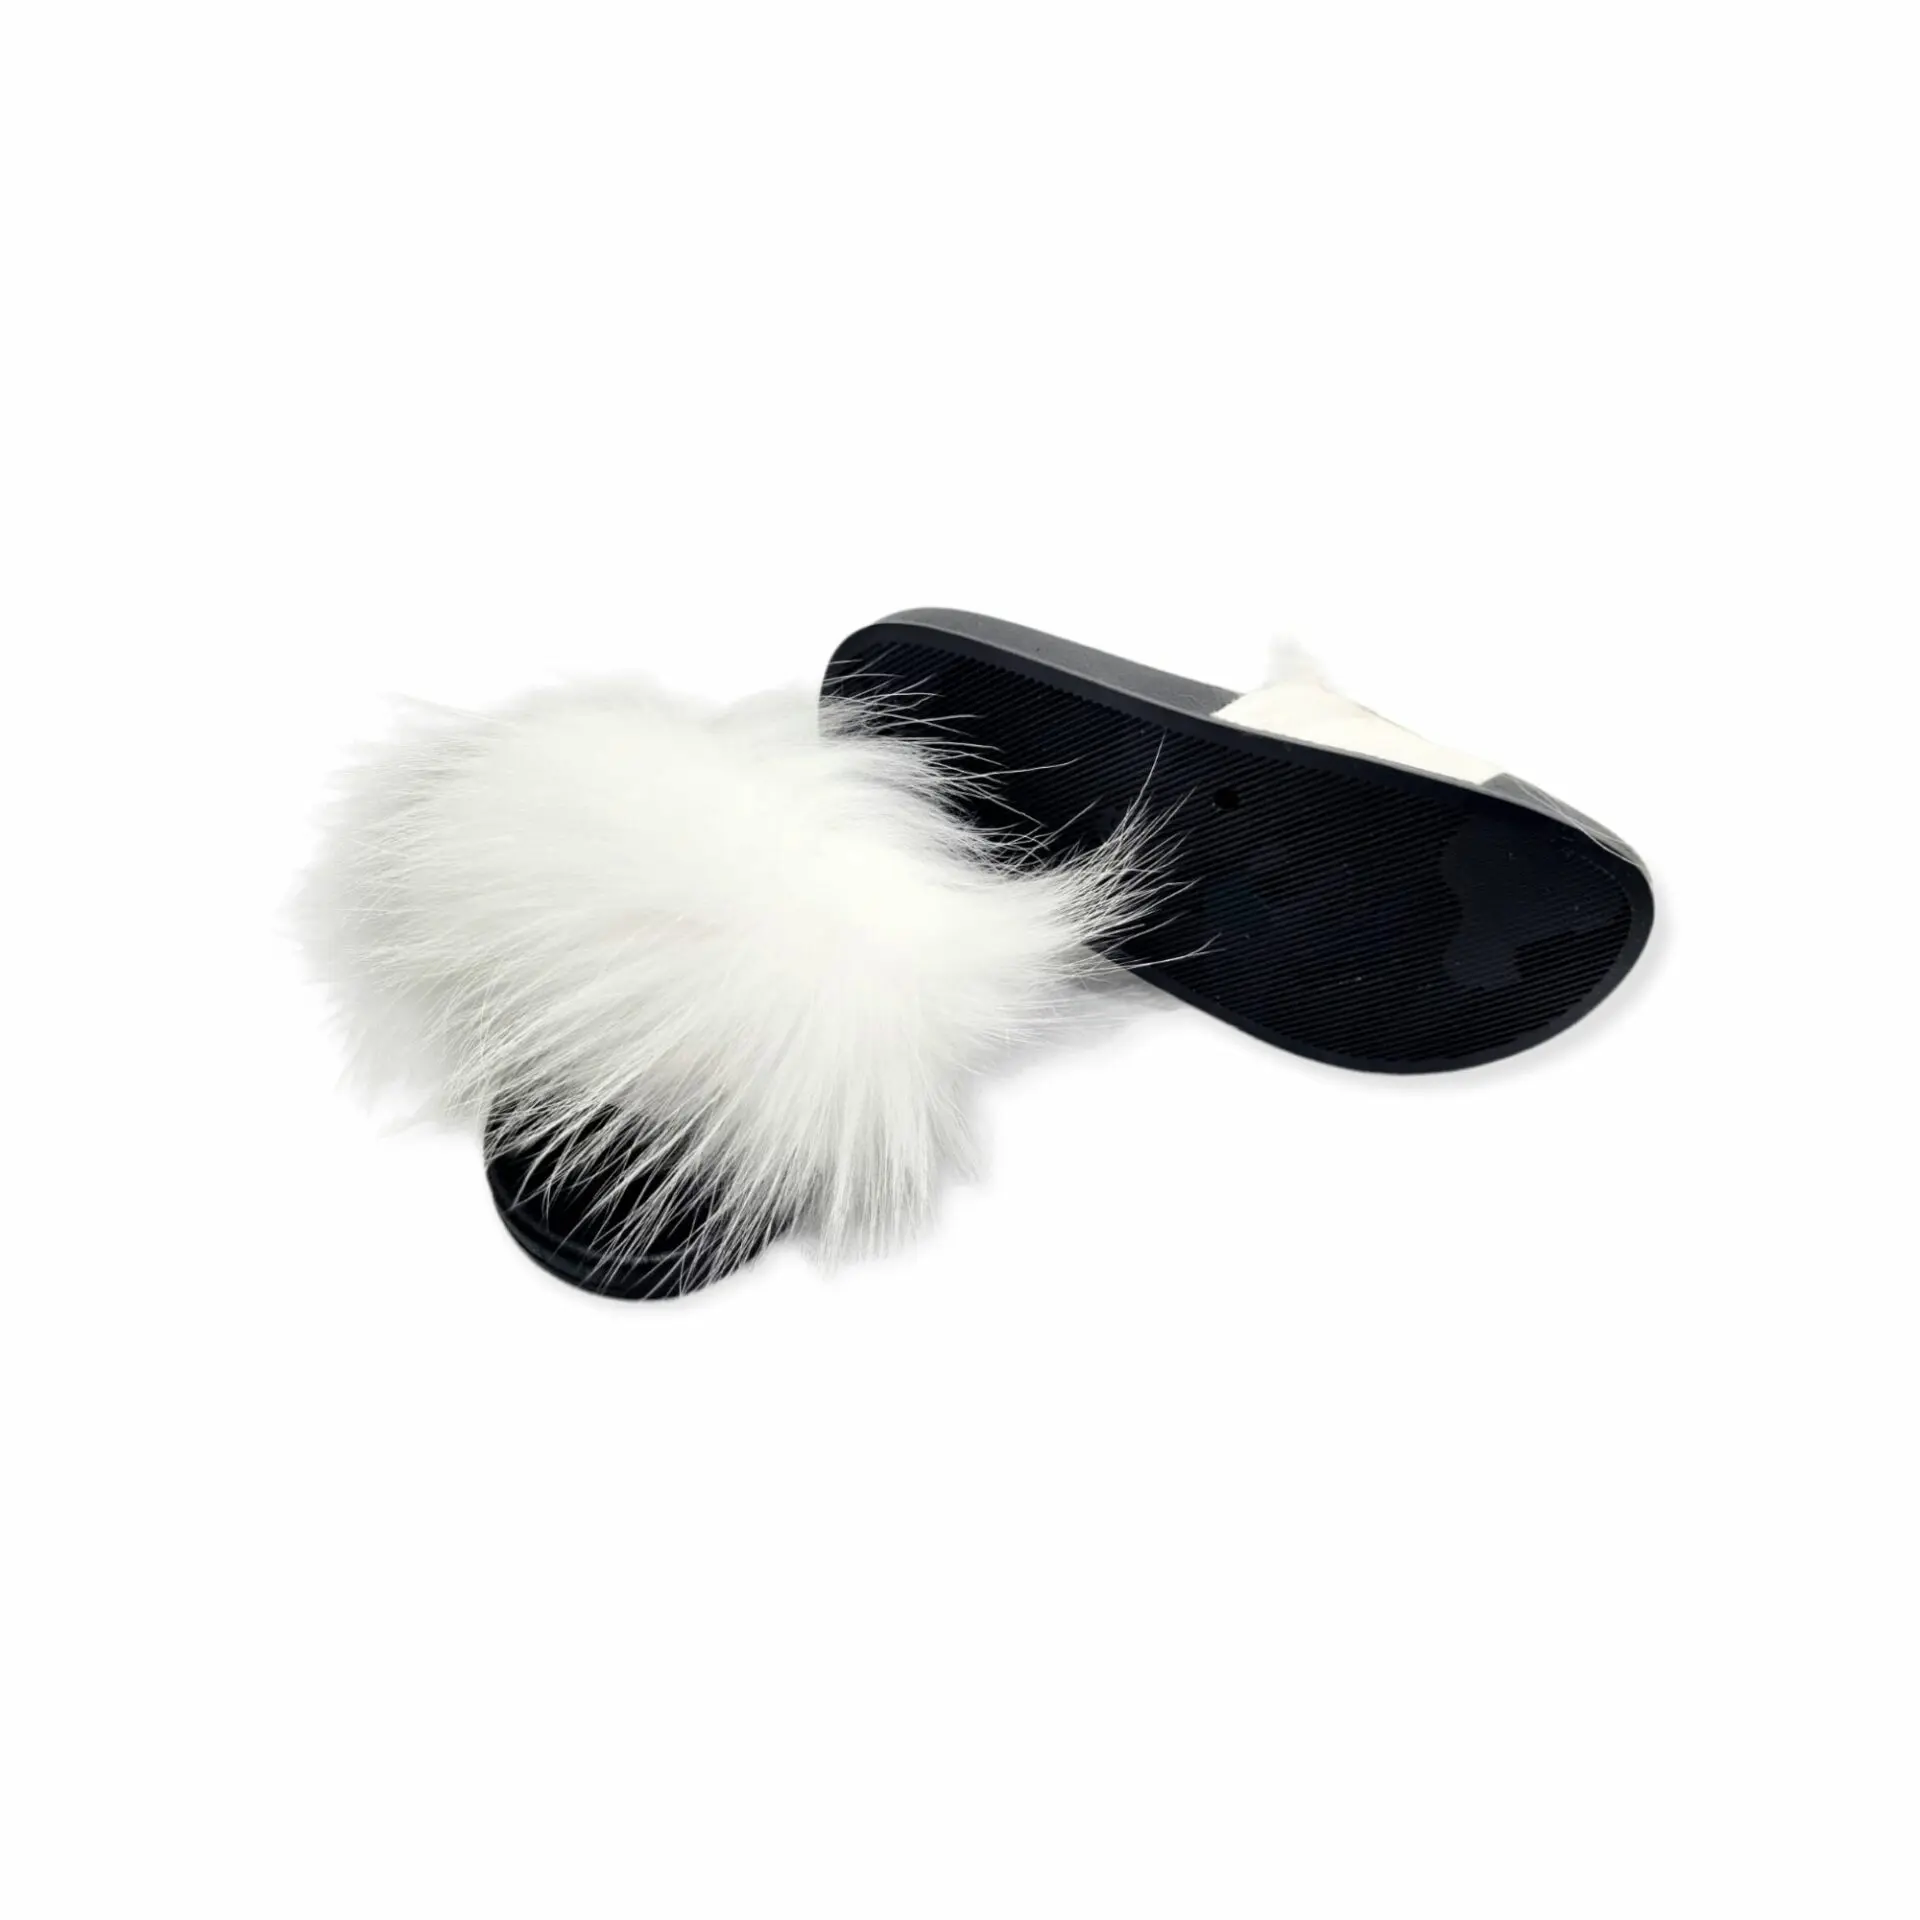 Furry slippers with rubber base and non-slip sole, 2.7cm rise. White color